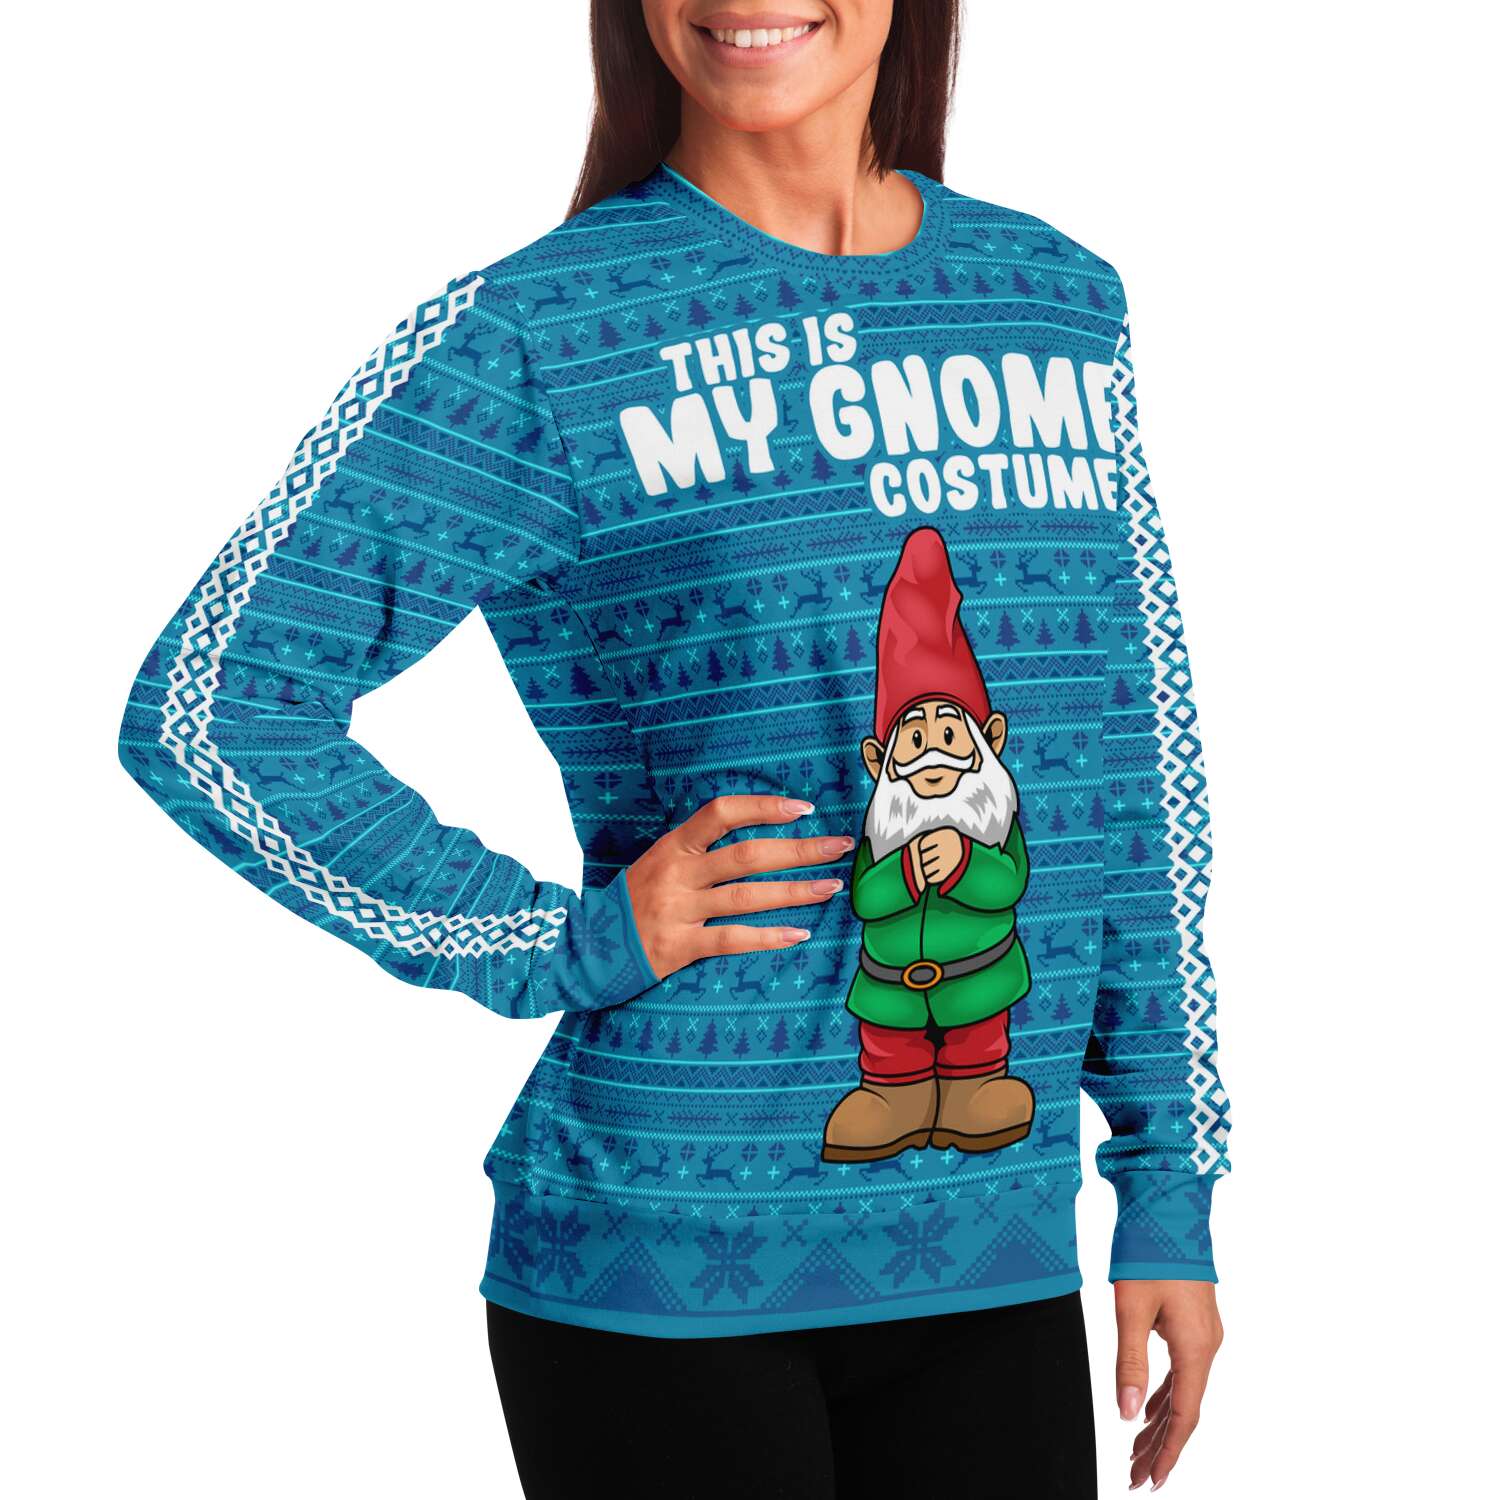 Subliminator This is my Gnome Costume Ugly Christmas Sweater Sweatshirt